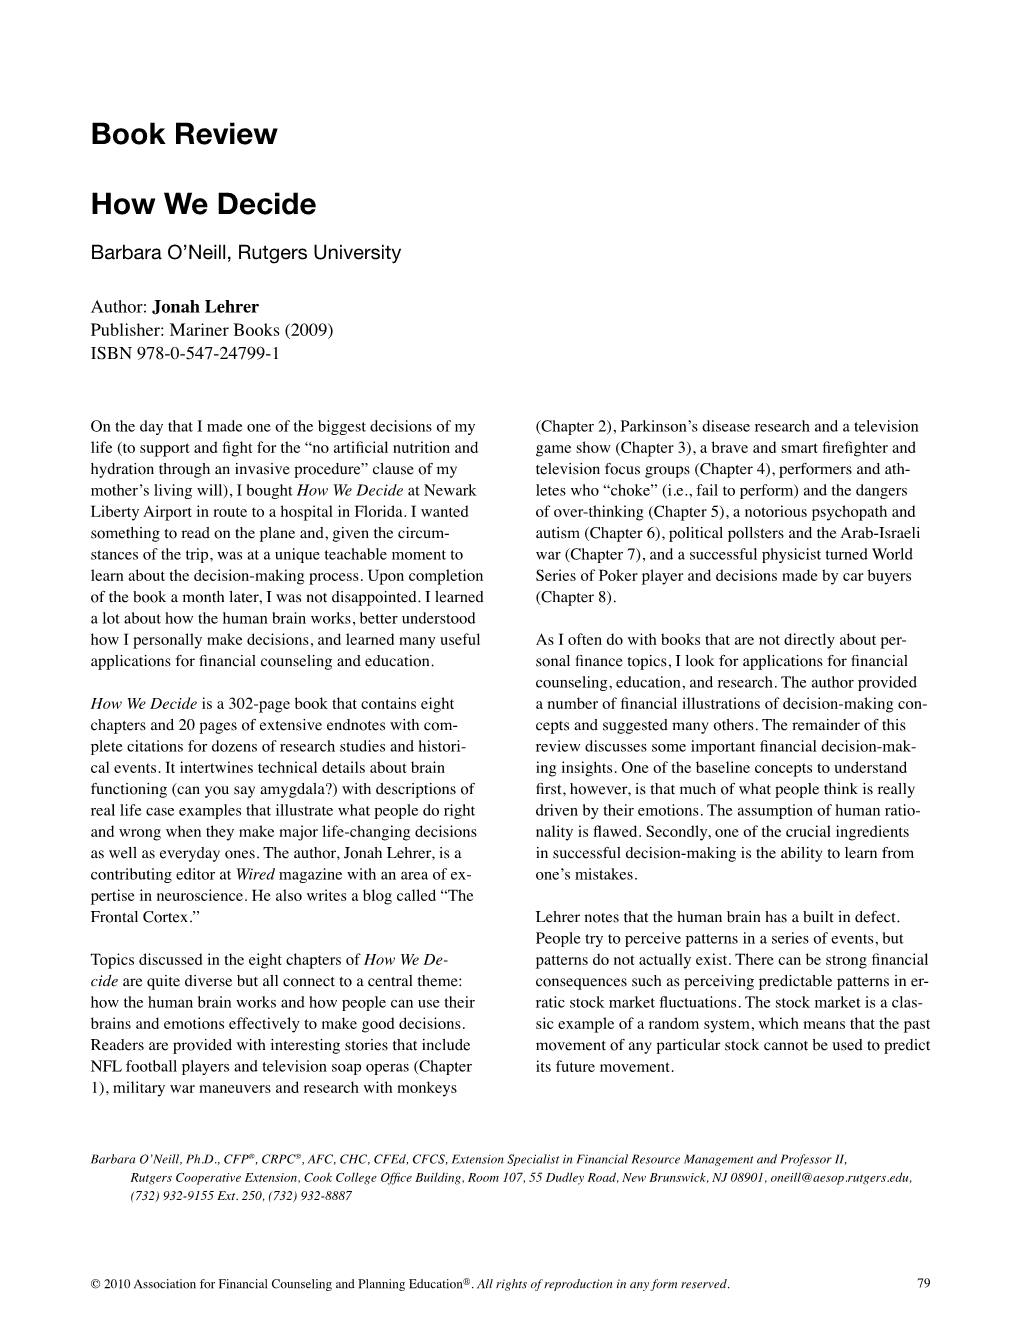 Book Review How We Decide